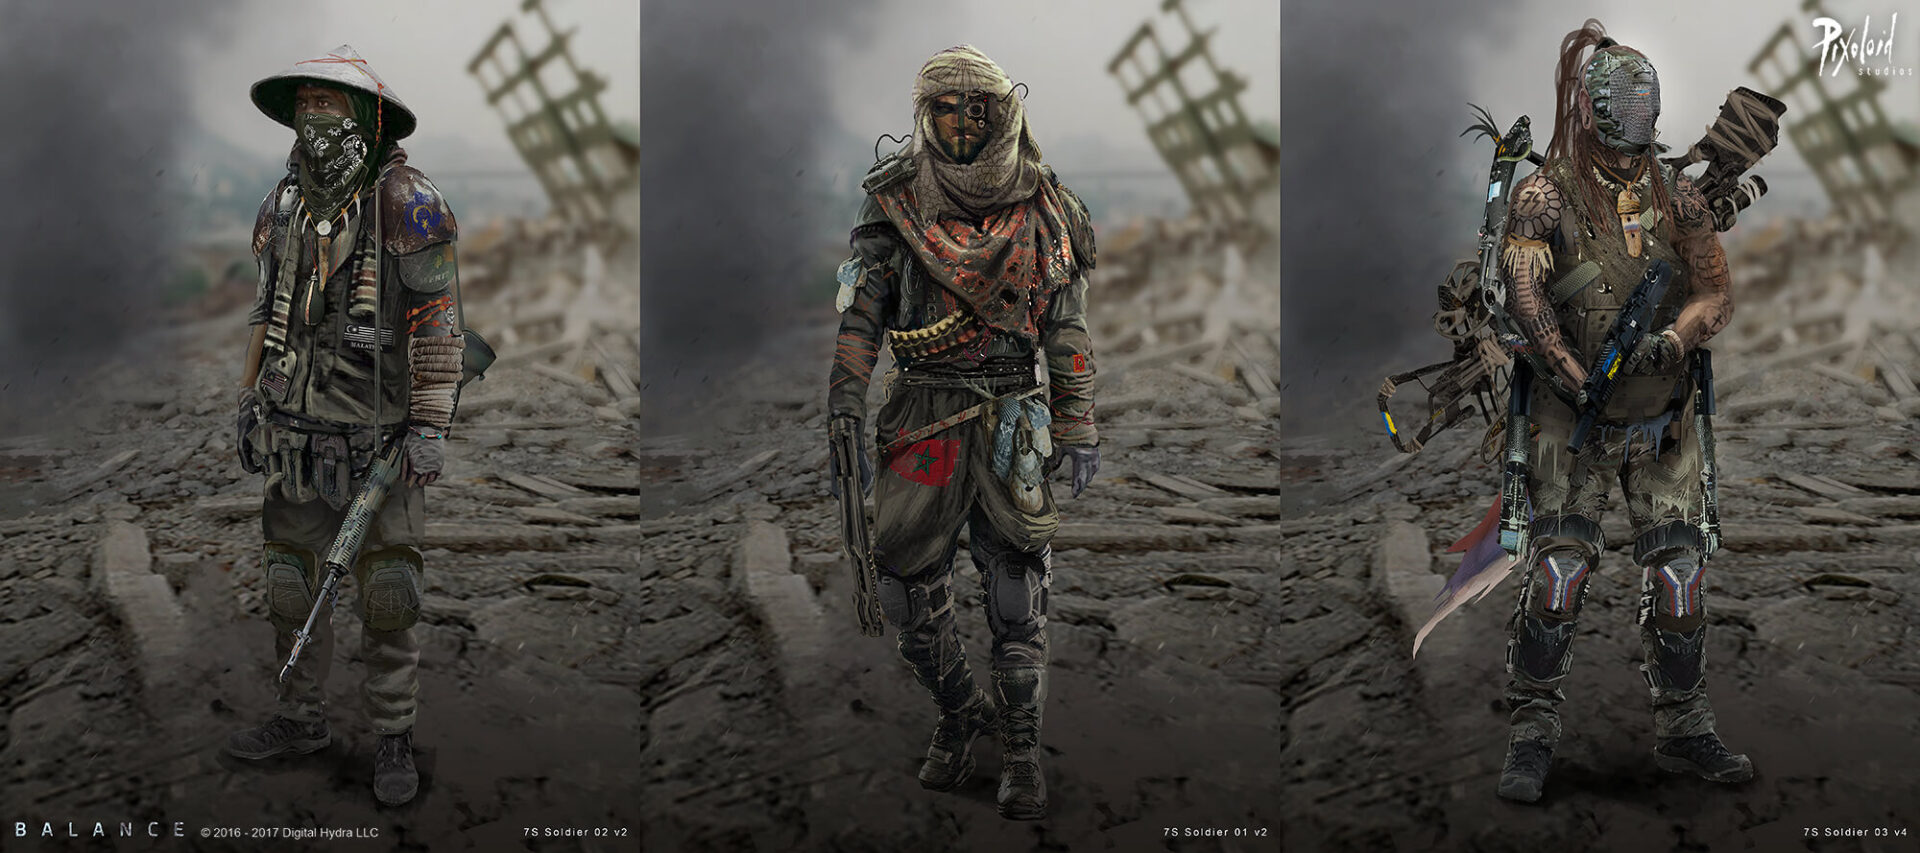 Balance soldier costume concept variations